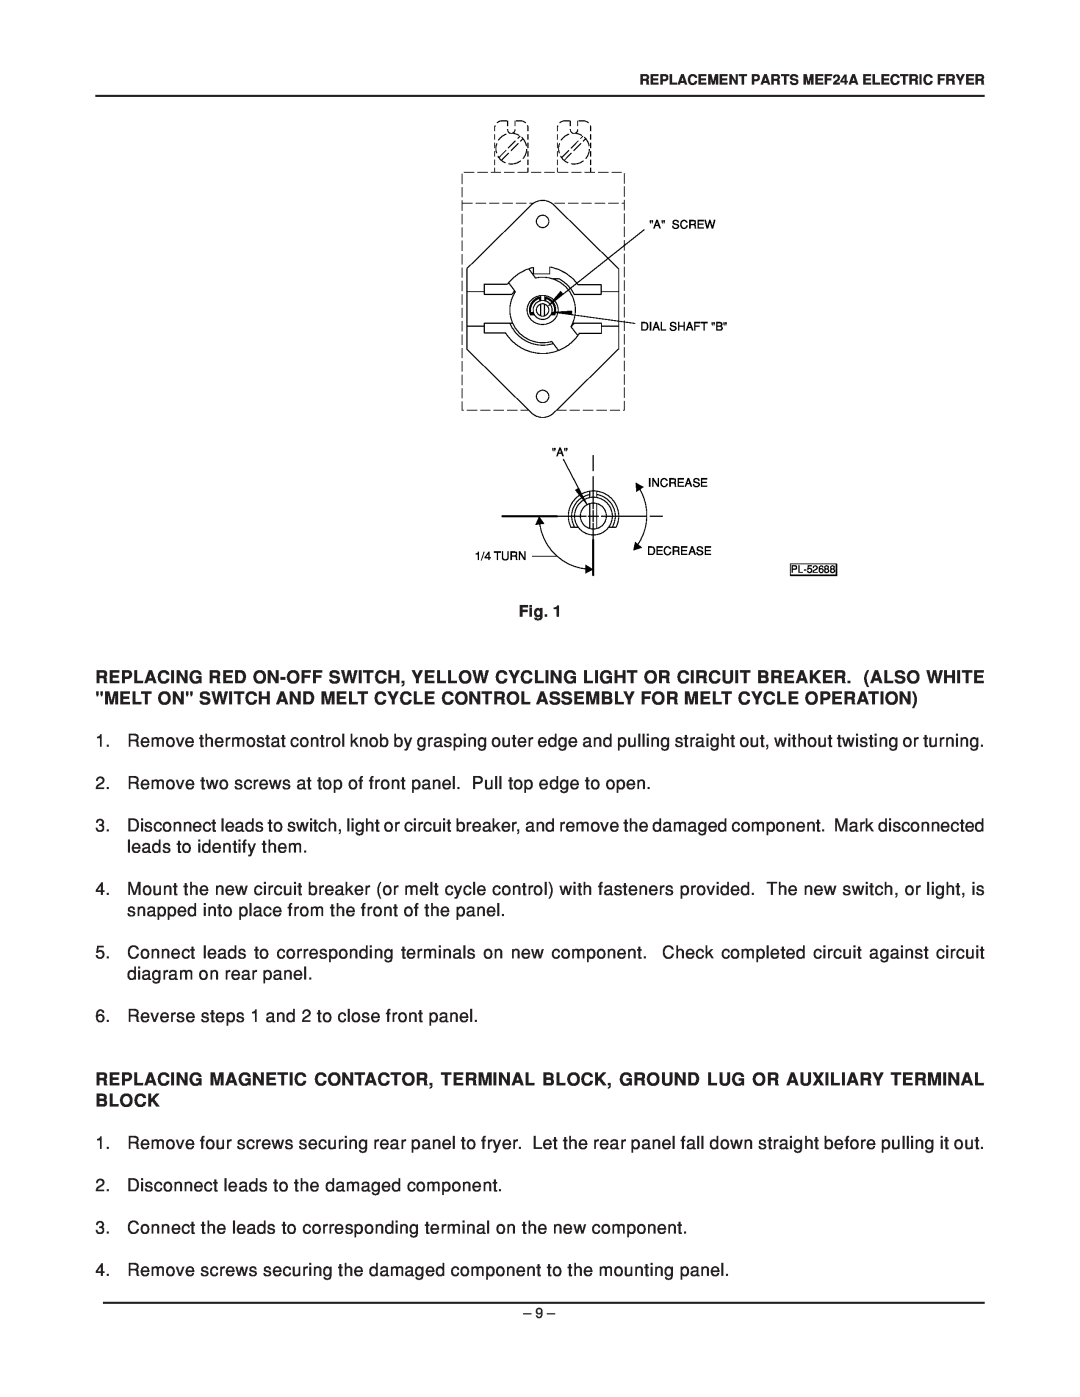 Vulcan-Hart MEF24A, ML-52837, ML-52836 service manual Reverse steps 1 and 2 to close front panel 